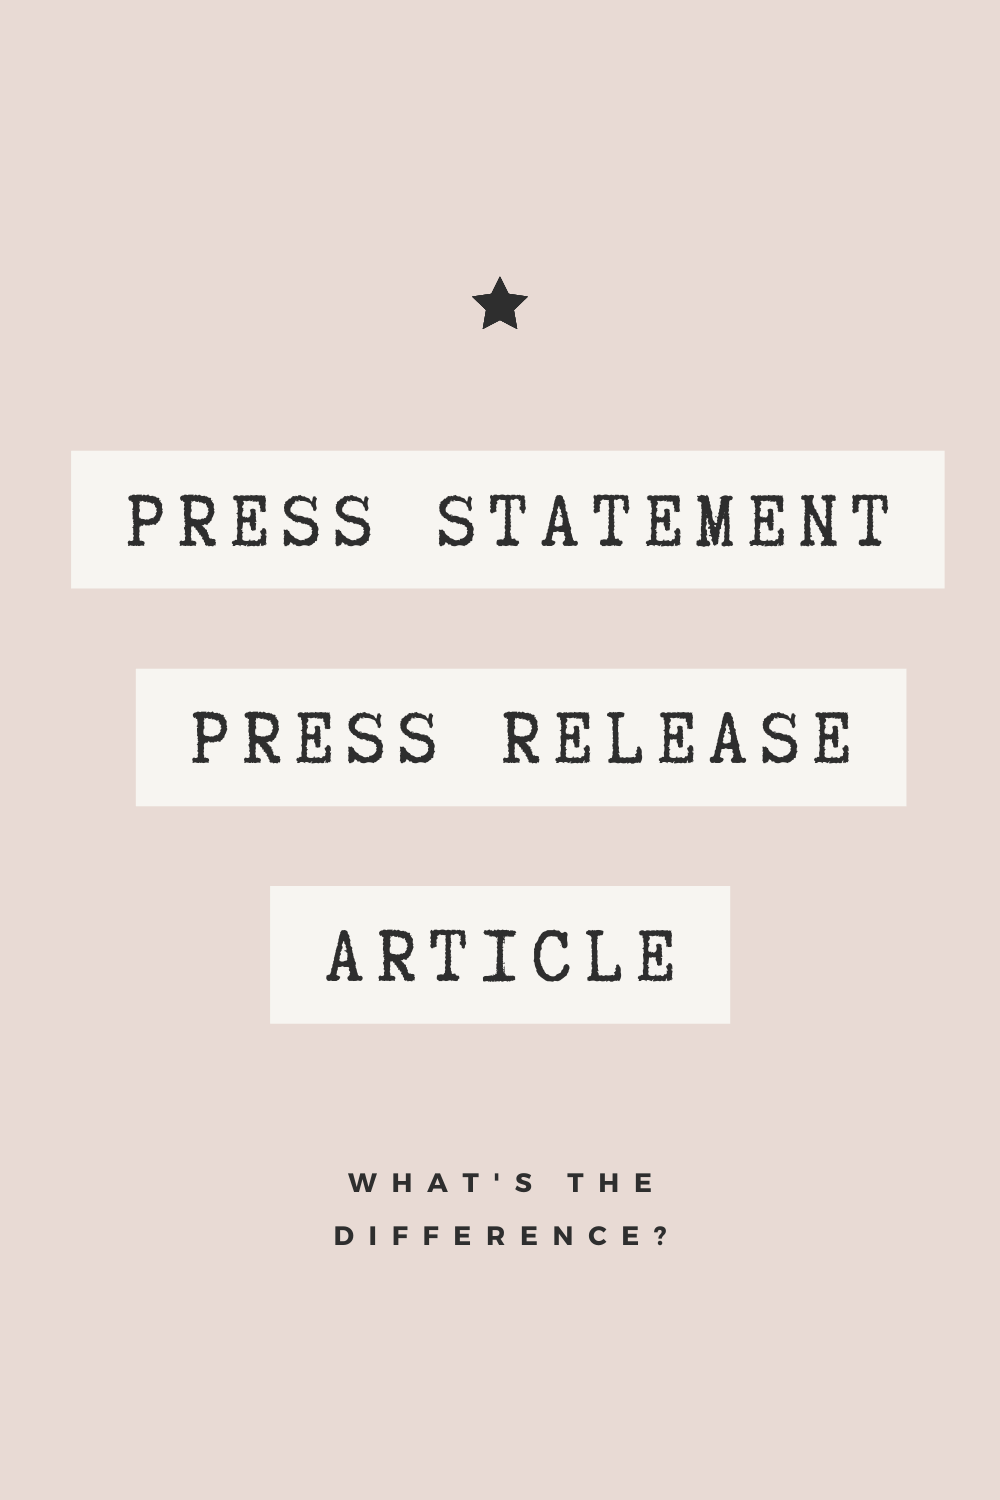 Press Statement vs. Press Release vs. Article: What’s The Difference?